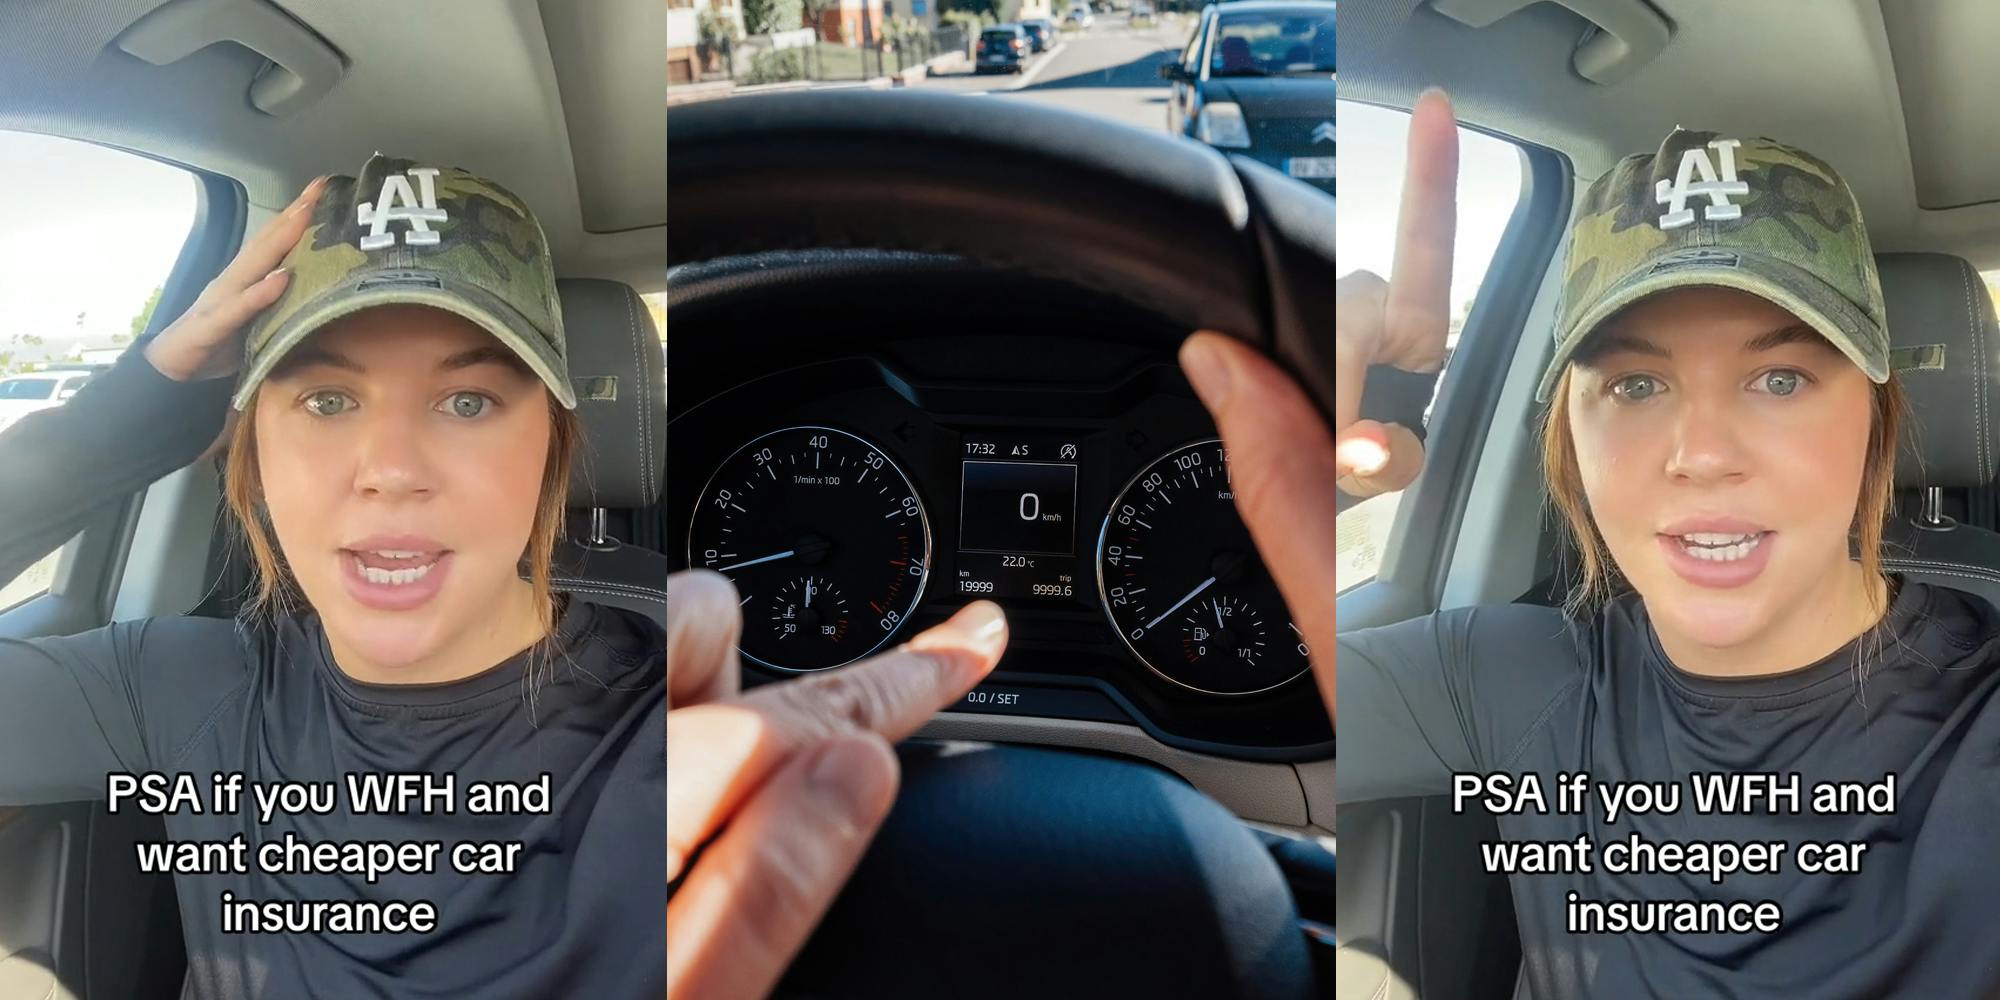 wfh worker in car speaking with caption "PSA if you WFH and want cheaper car insurance" (l) woman in driver seat pointing to milage on car display (c) wfh worker in car speaking with caption "PSA if you WFH and want cheaper car insurance" (r)